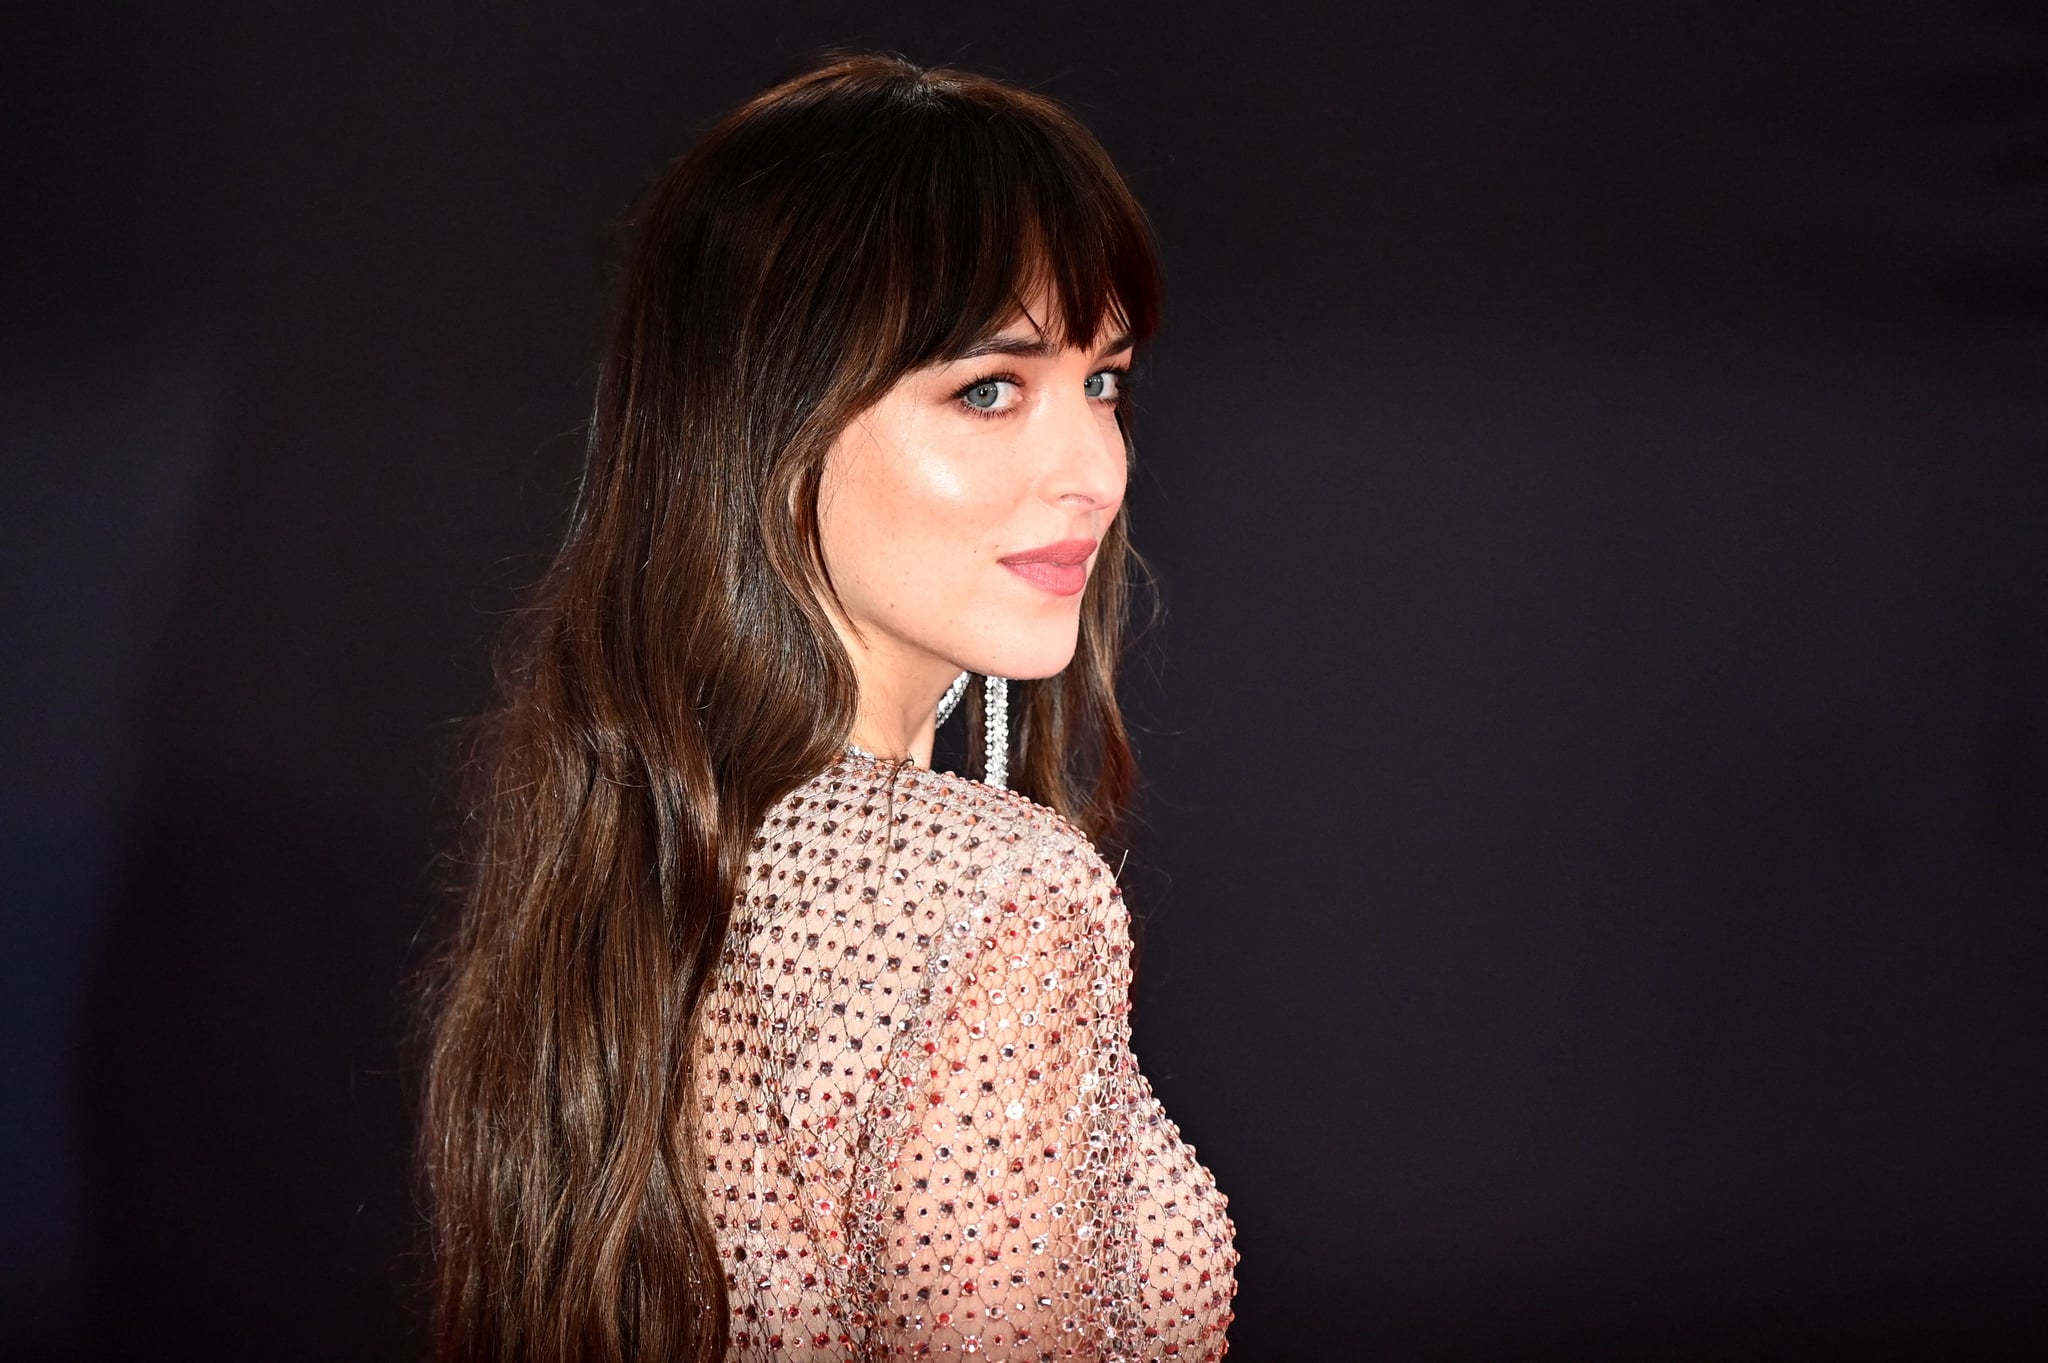 TOPSHOT - American actress Dakota Johnson poses on the red carpet on her arrival to attend the European premiere of the film 'The Lost Daughter', during the 2021 BFI London Film Festival in London on October 13, 2021. (Photo by JUSTIN TALLIS / AFP) (Photo by JUSTIN TALLIS/AFP via Getty Images)